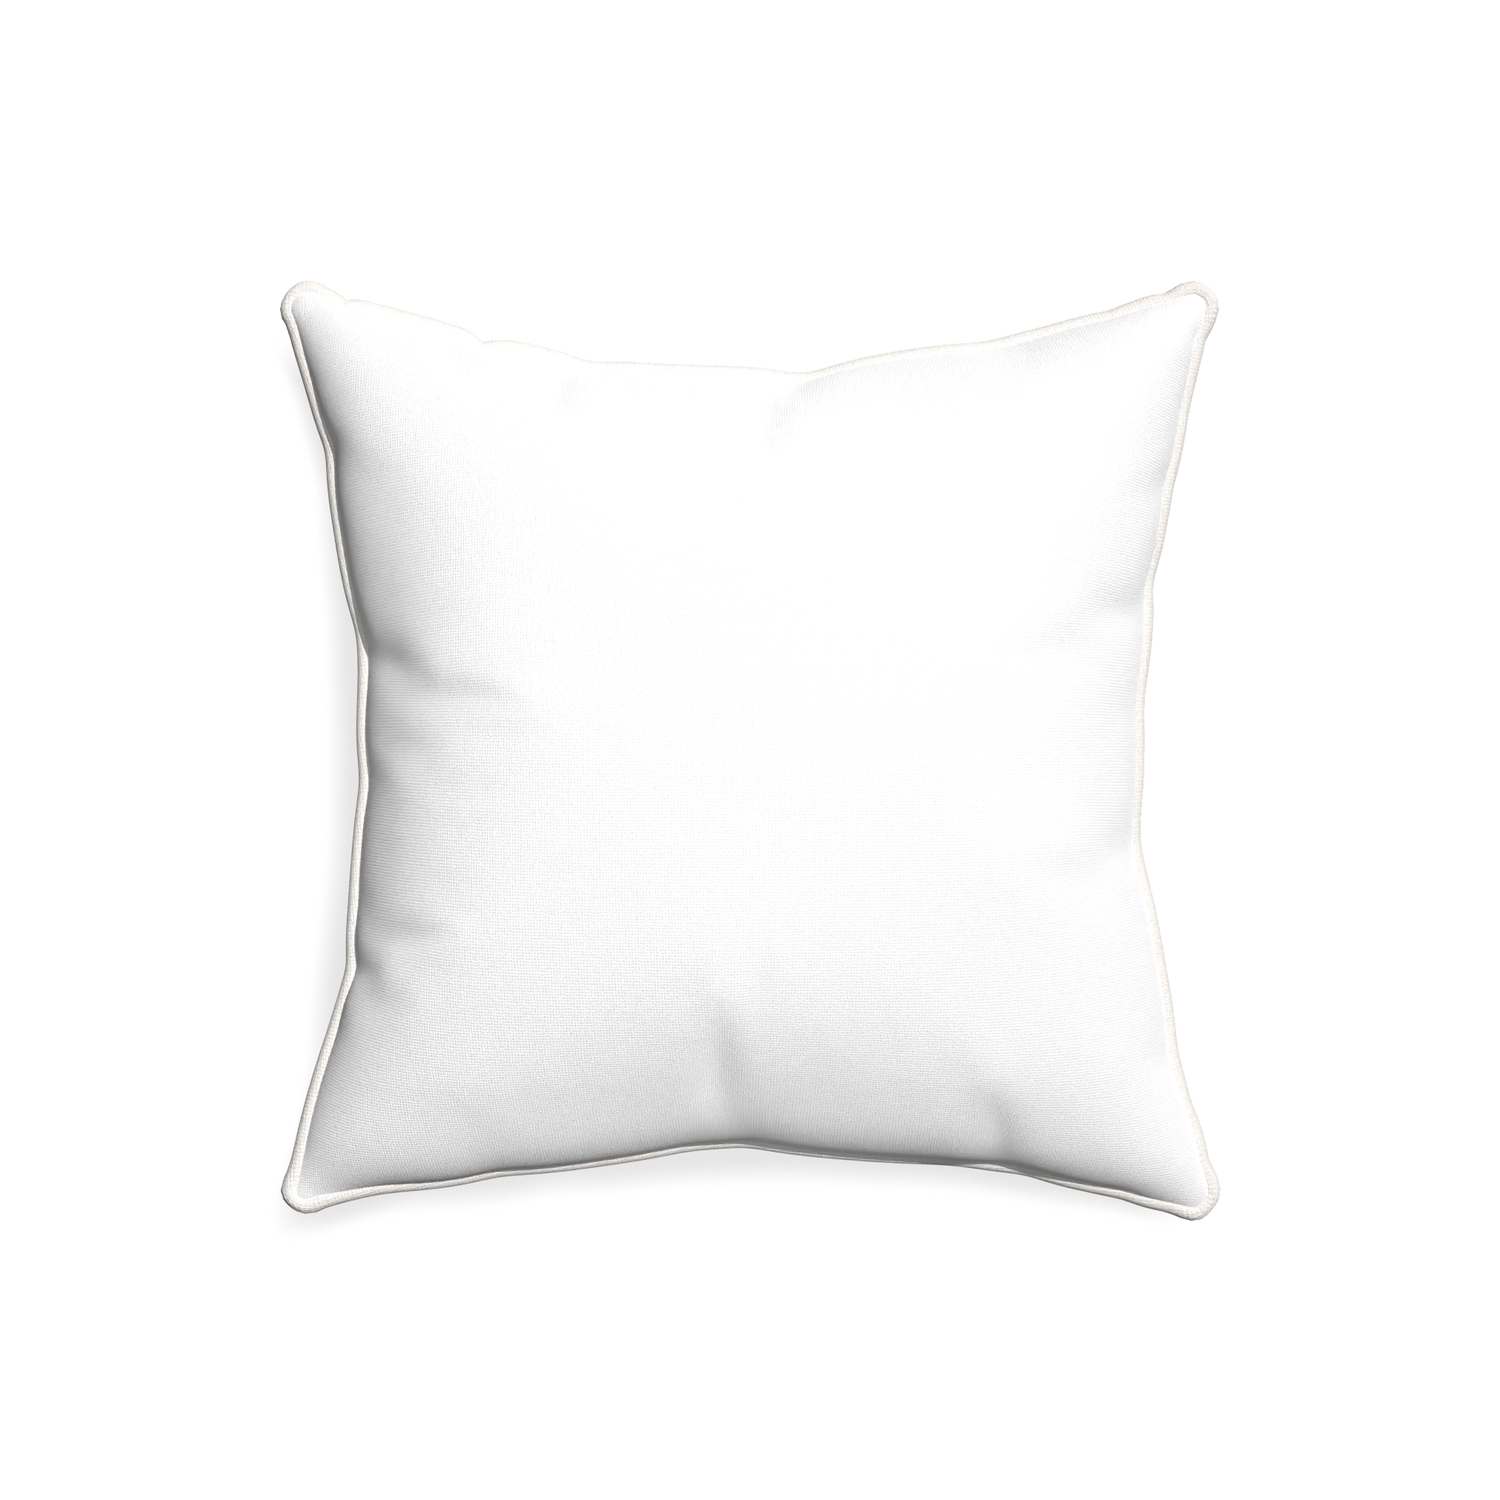 20-square snow custom pillow with snow piping on white background